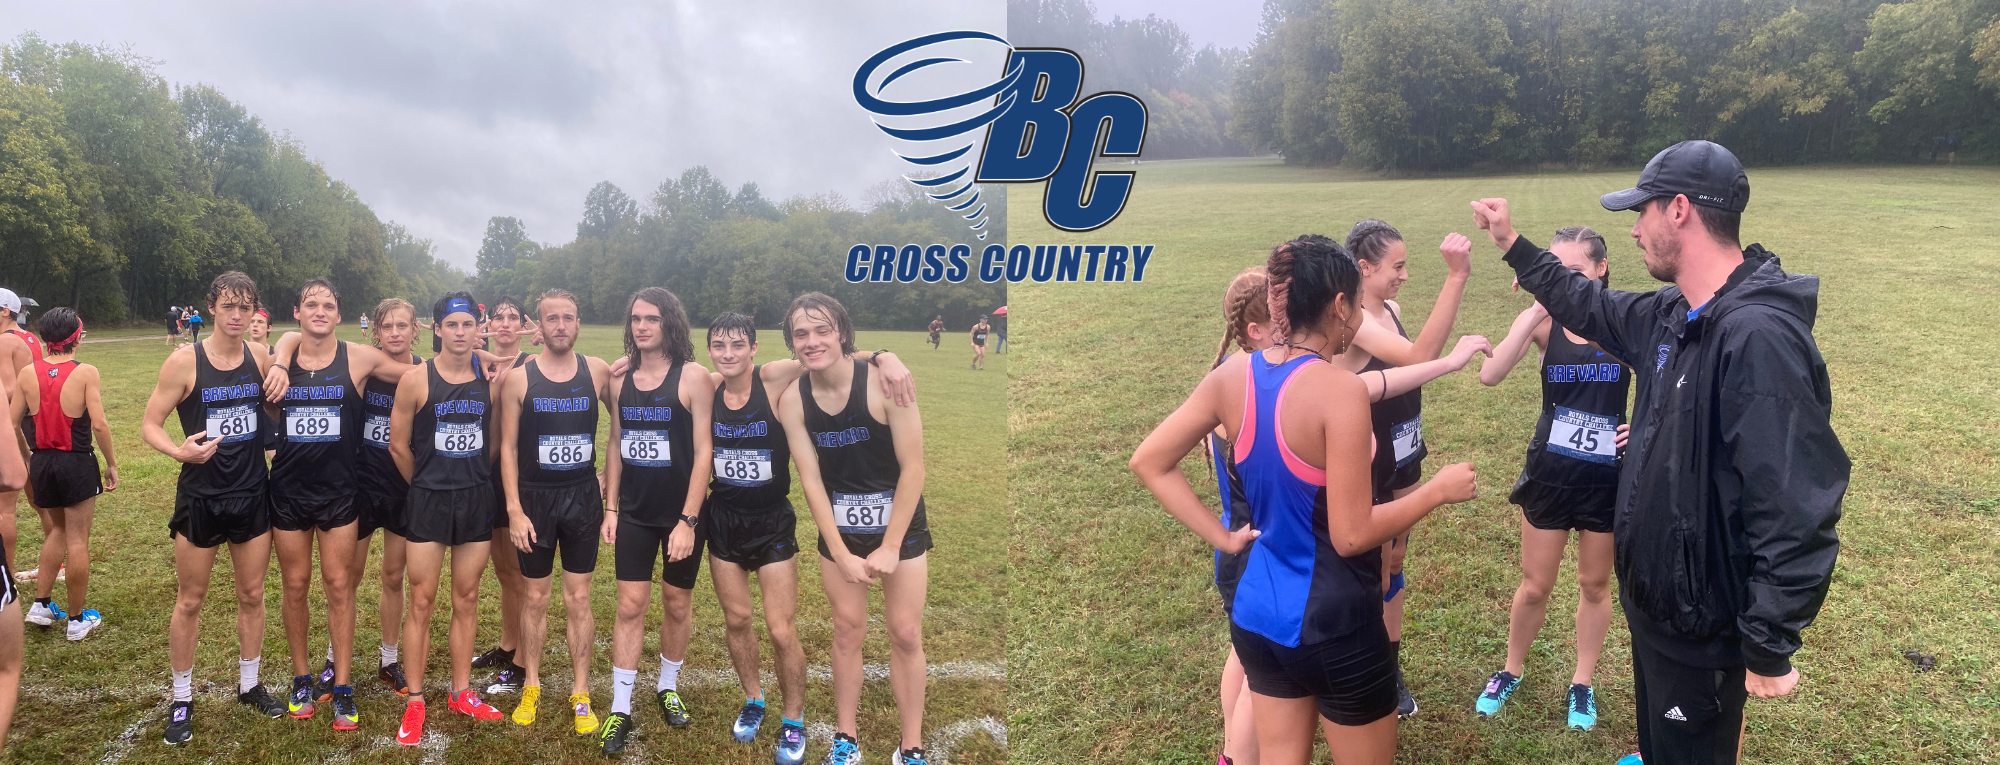 BC Men’s XC Finish 6th out of 25 Teams at Royals Challenge; Tornados Continue to Set PR’s